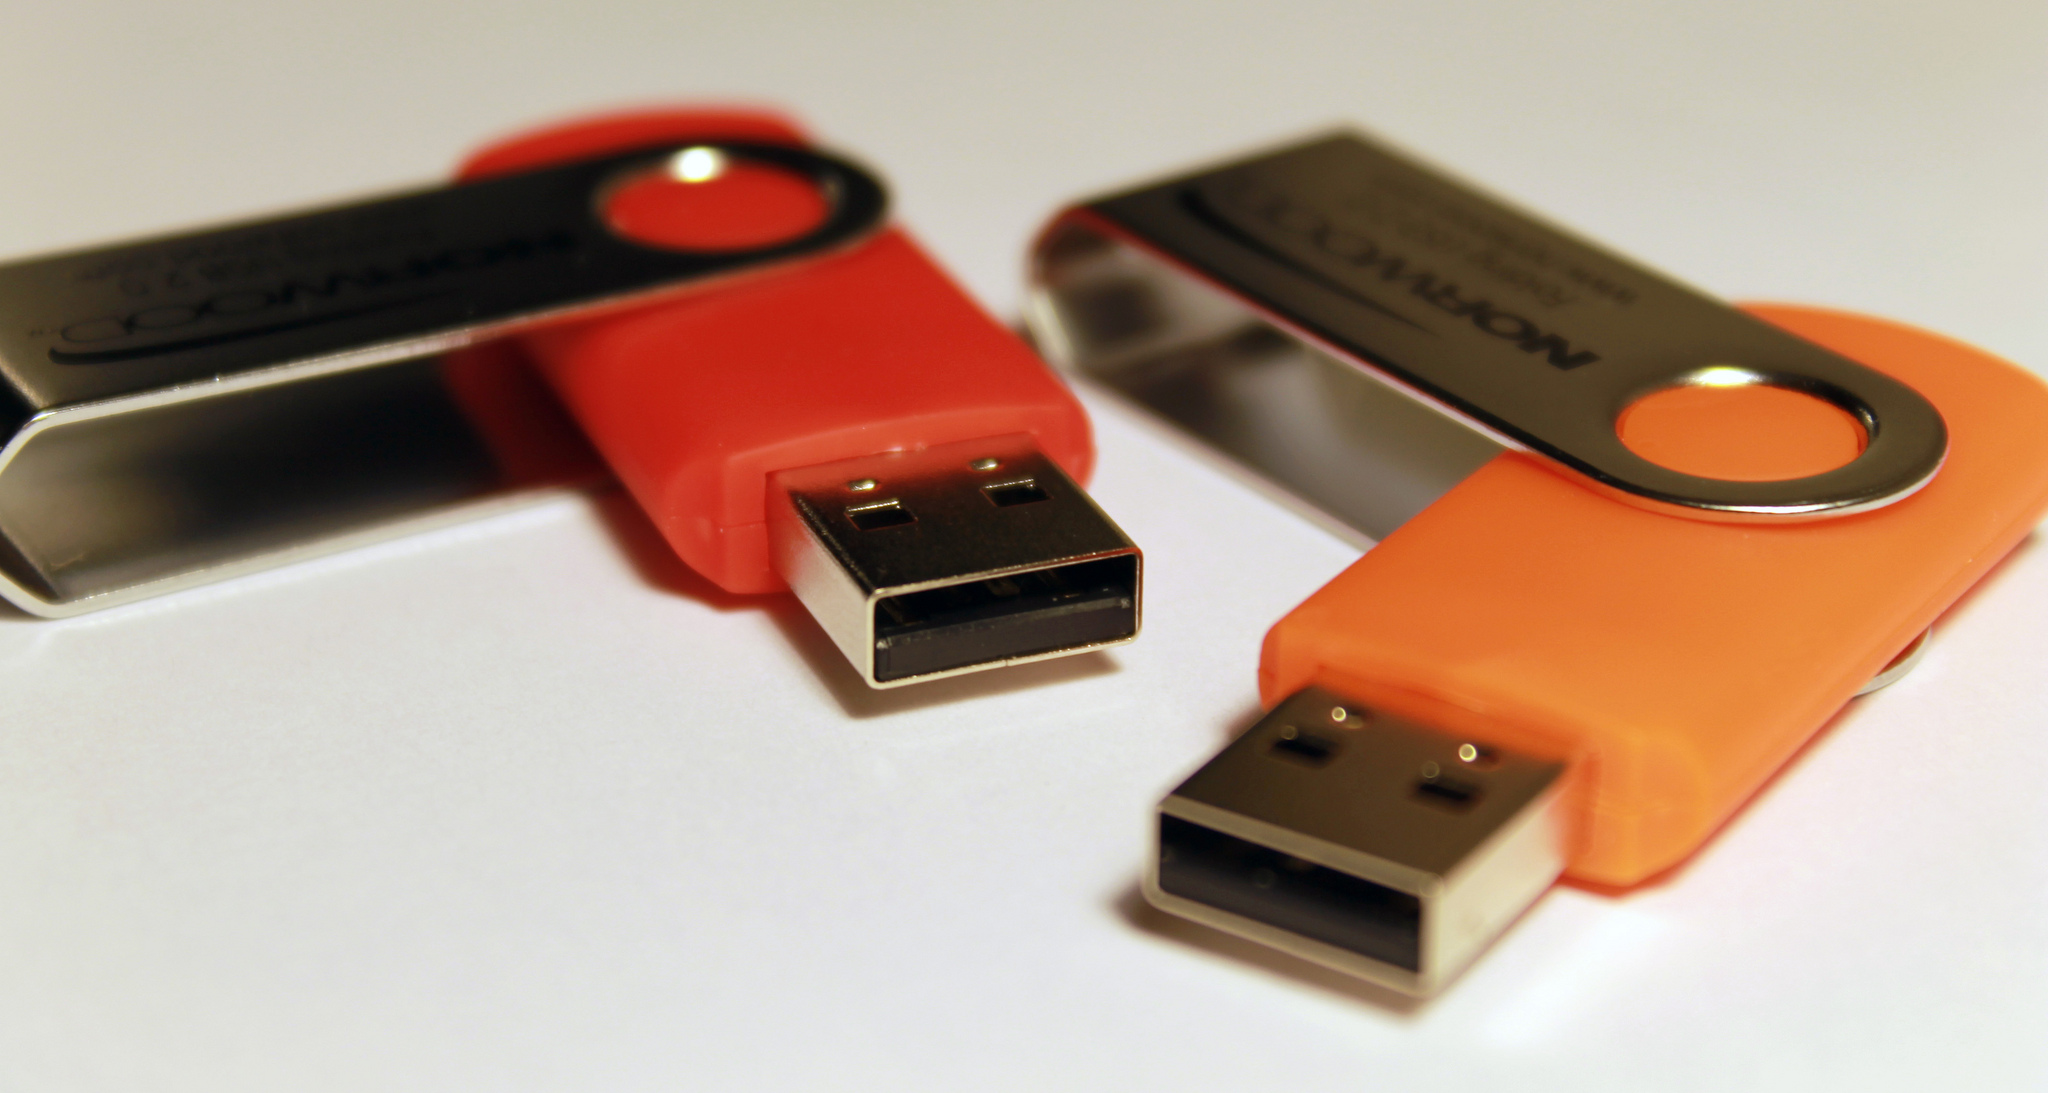 how to reformat a usb drive to change storage capacity